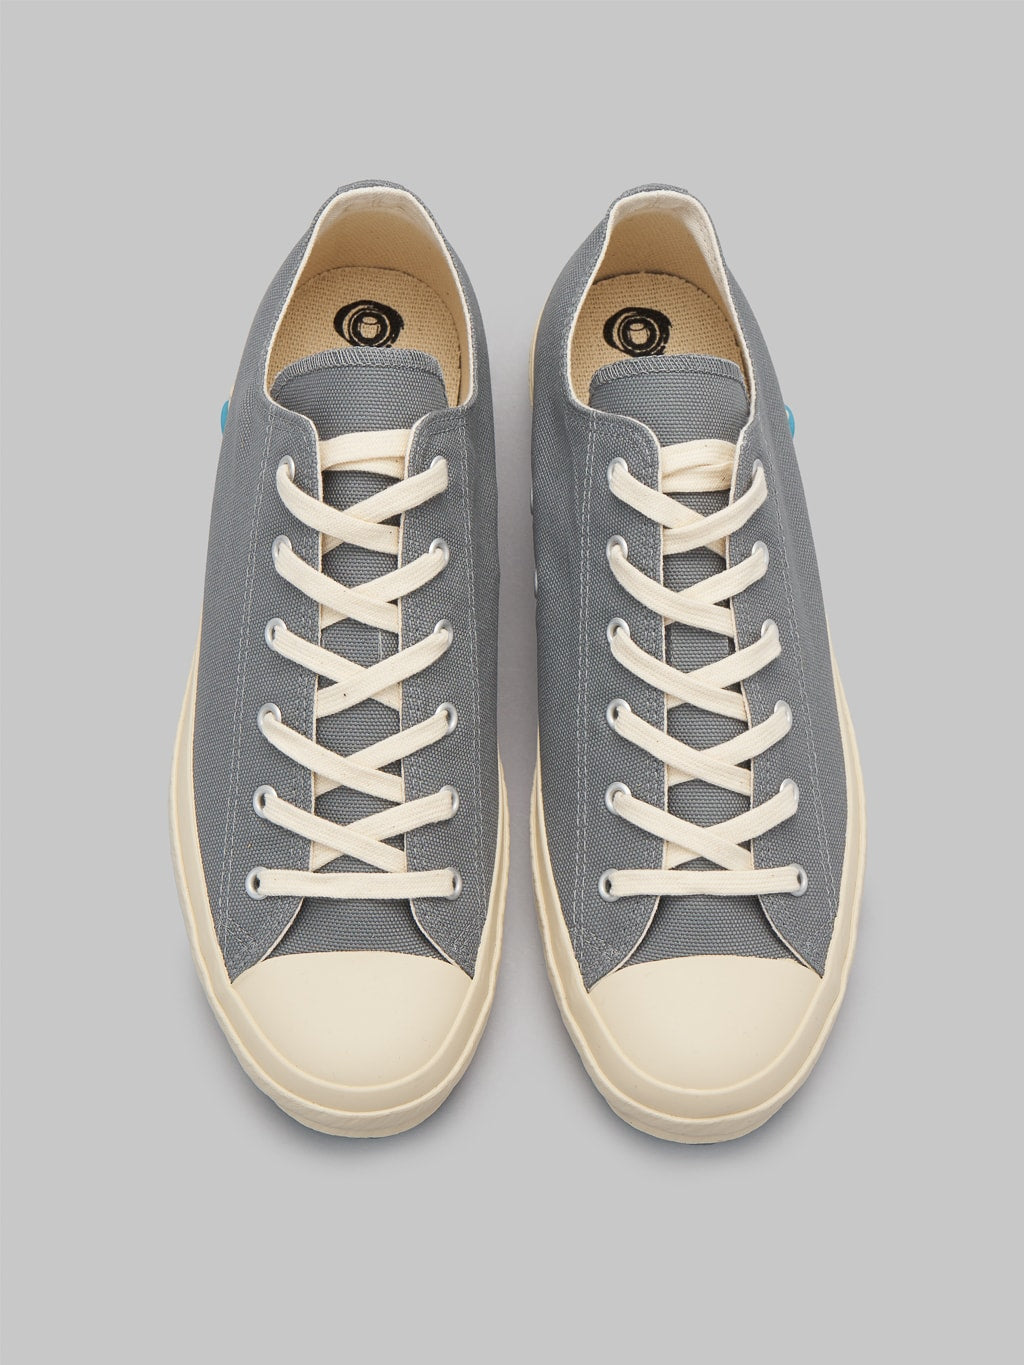 Shoes like pottery low grey sneakers up view